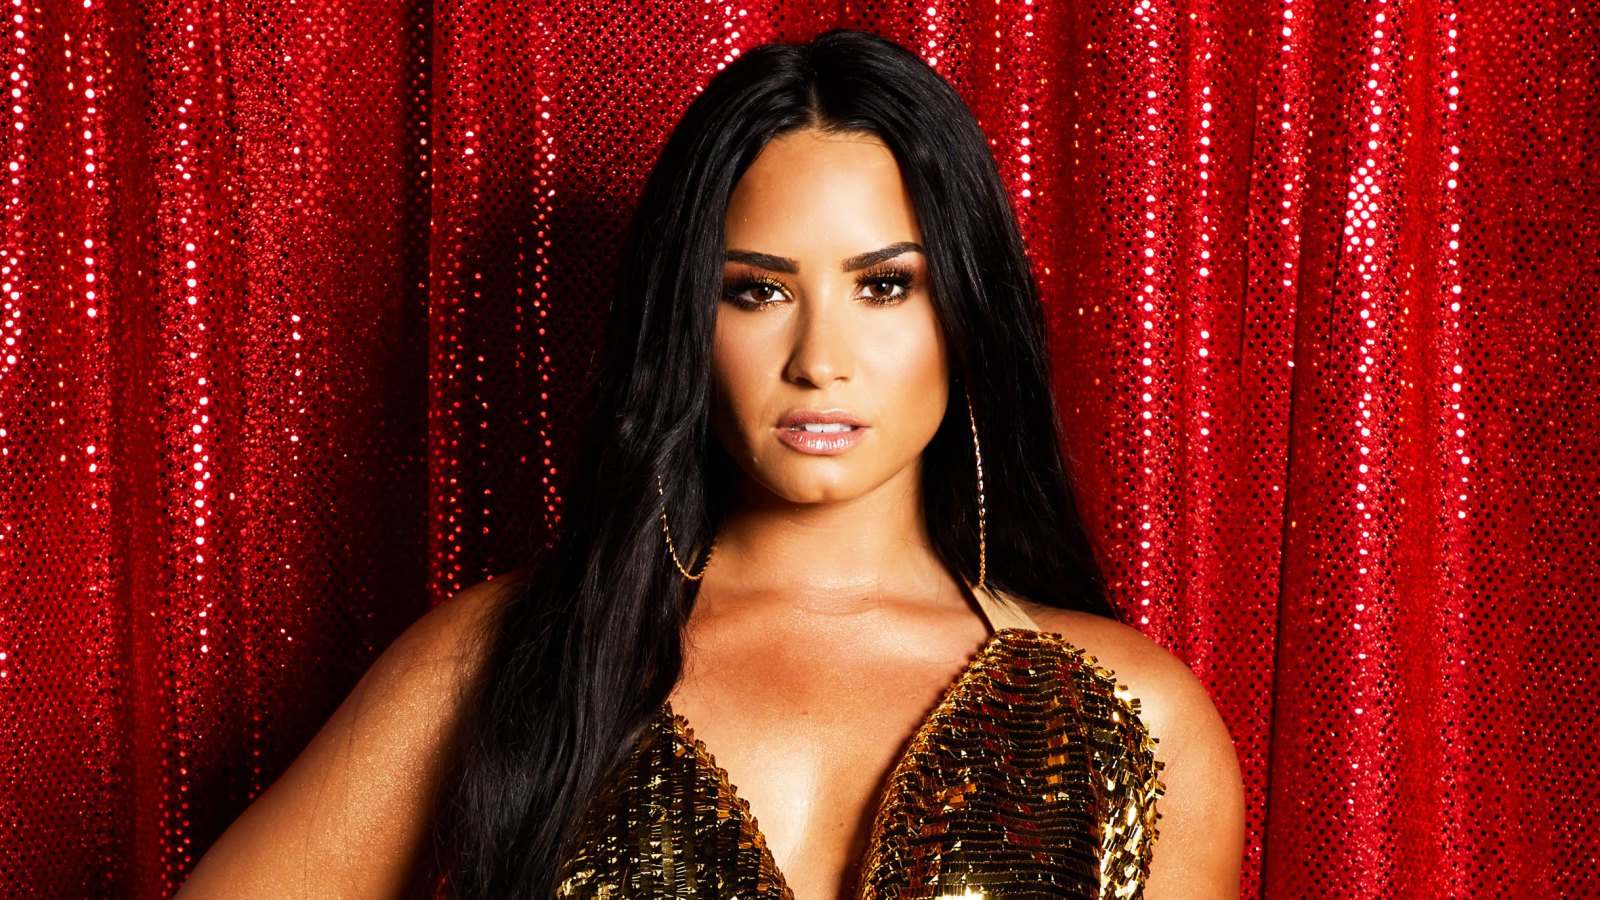 Demi Lovato Says She's Been to Rehab ‘Several Times,' Reveals She Battled an Eating Disorder